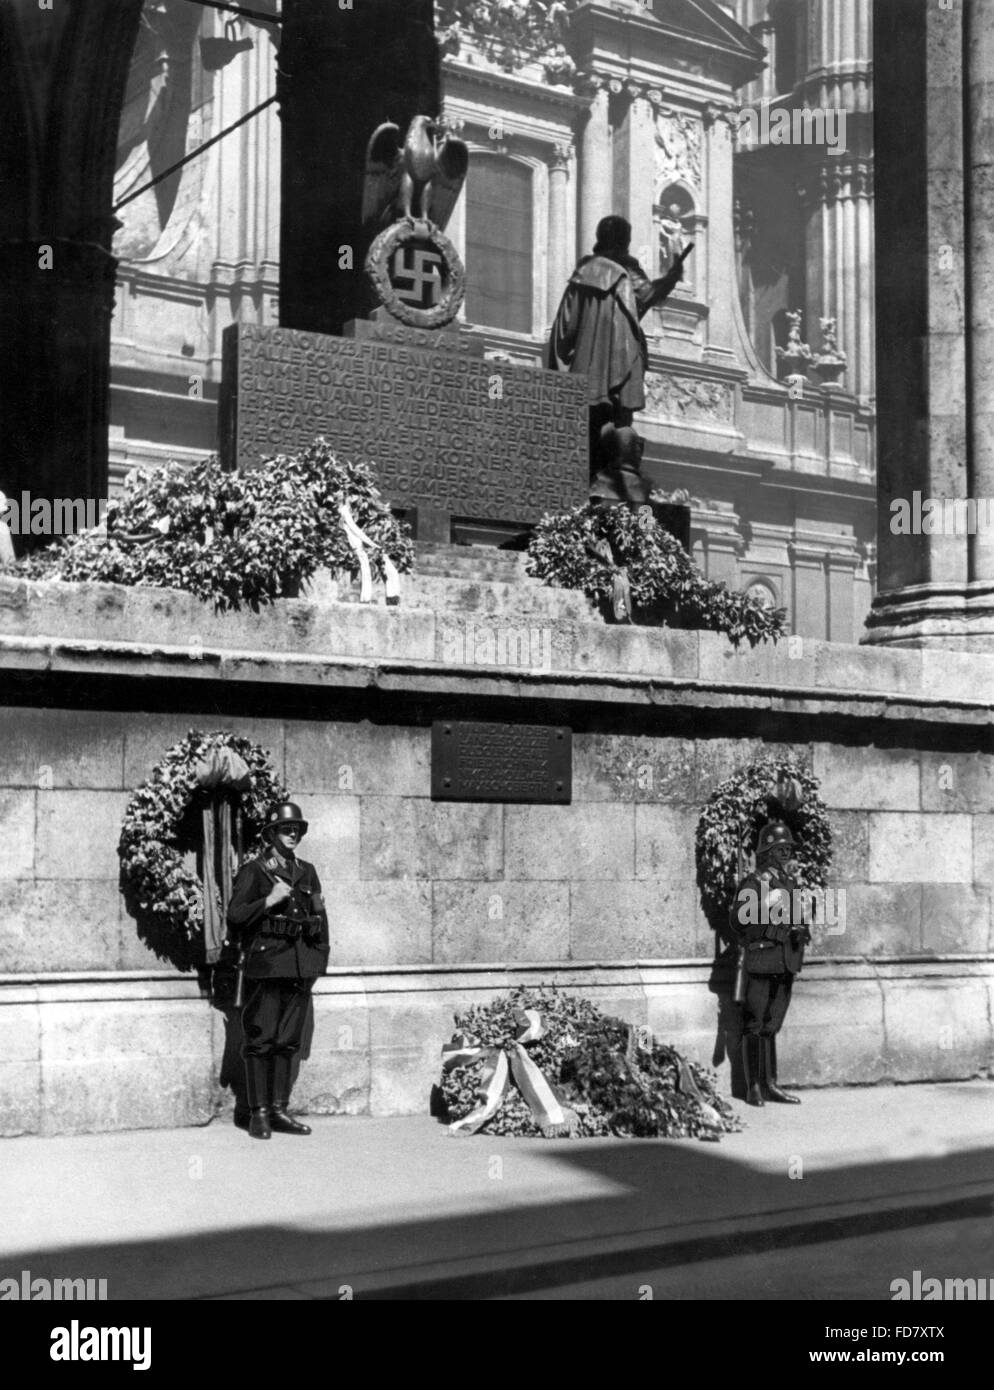 Cenotaph at Field Marshals' Hall in Munich Stock Photo